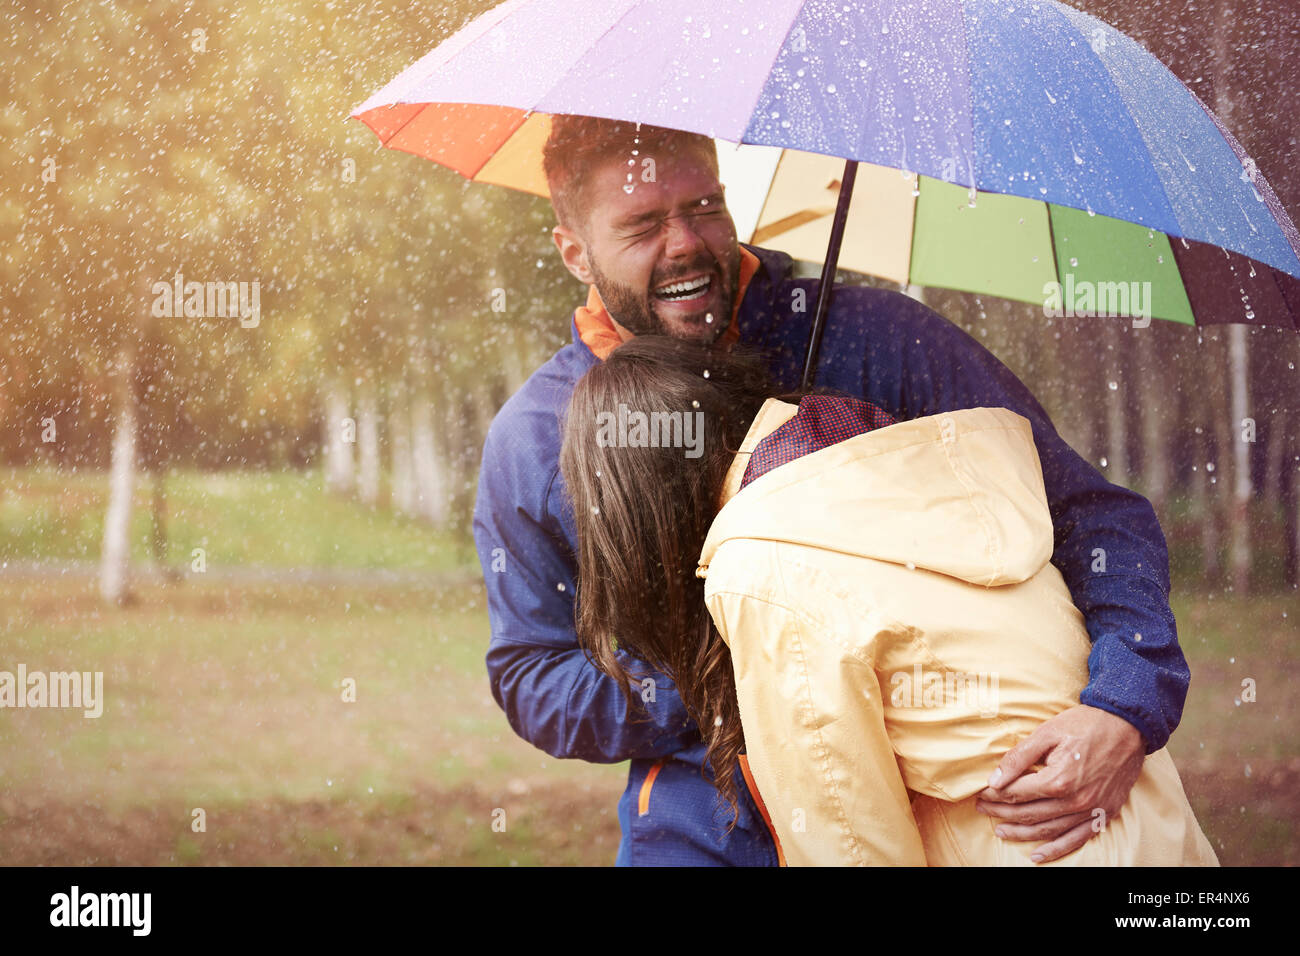 Baby! Don't be afraid, it's only rain. Debica, Poland Stock Photo